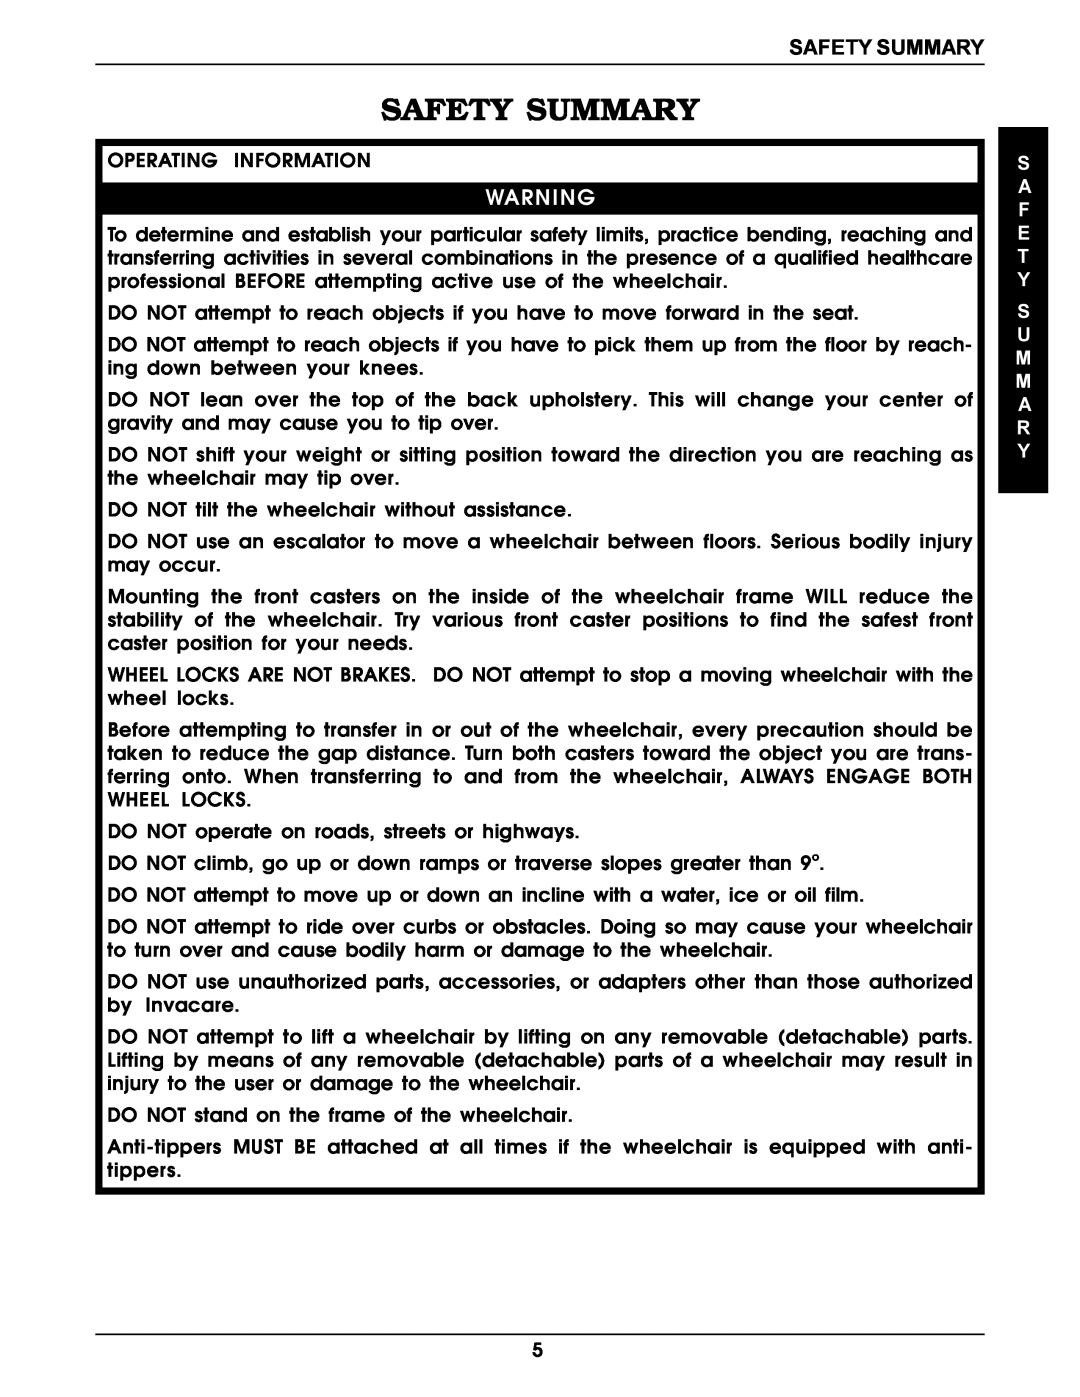 Invacare Pro Series manual Safety Summary, S A F E T Y S U M M A R Y 